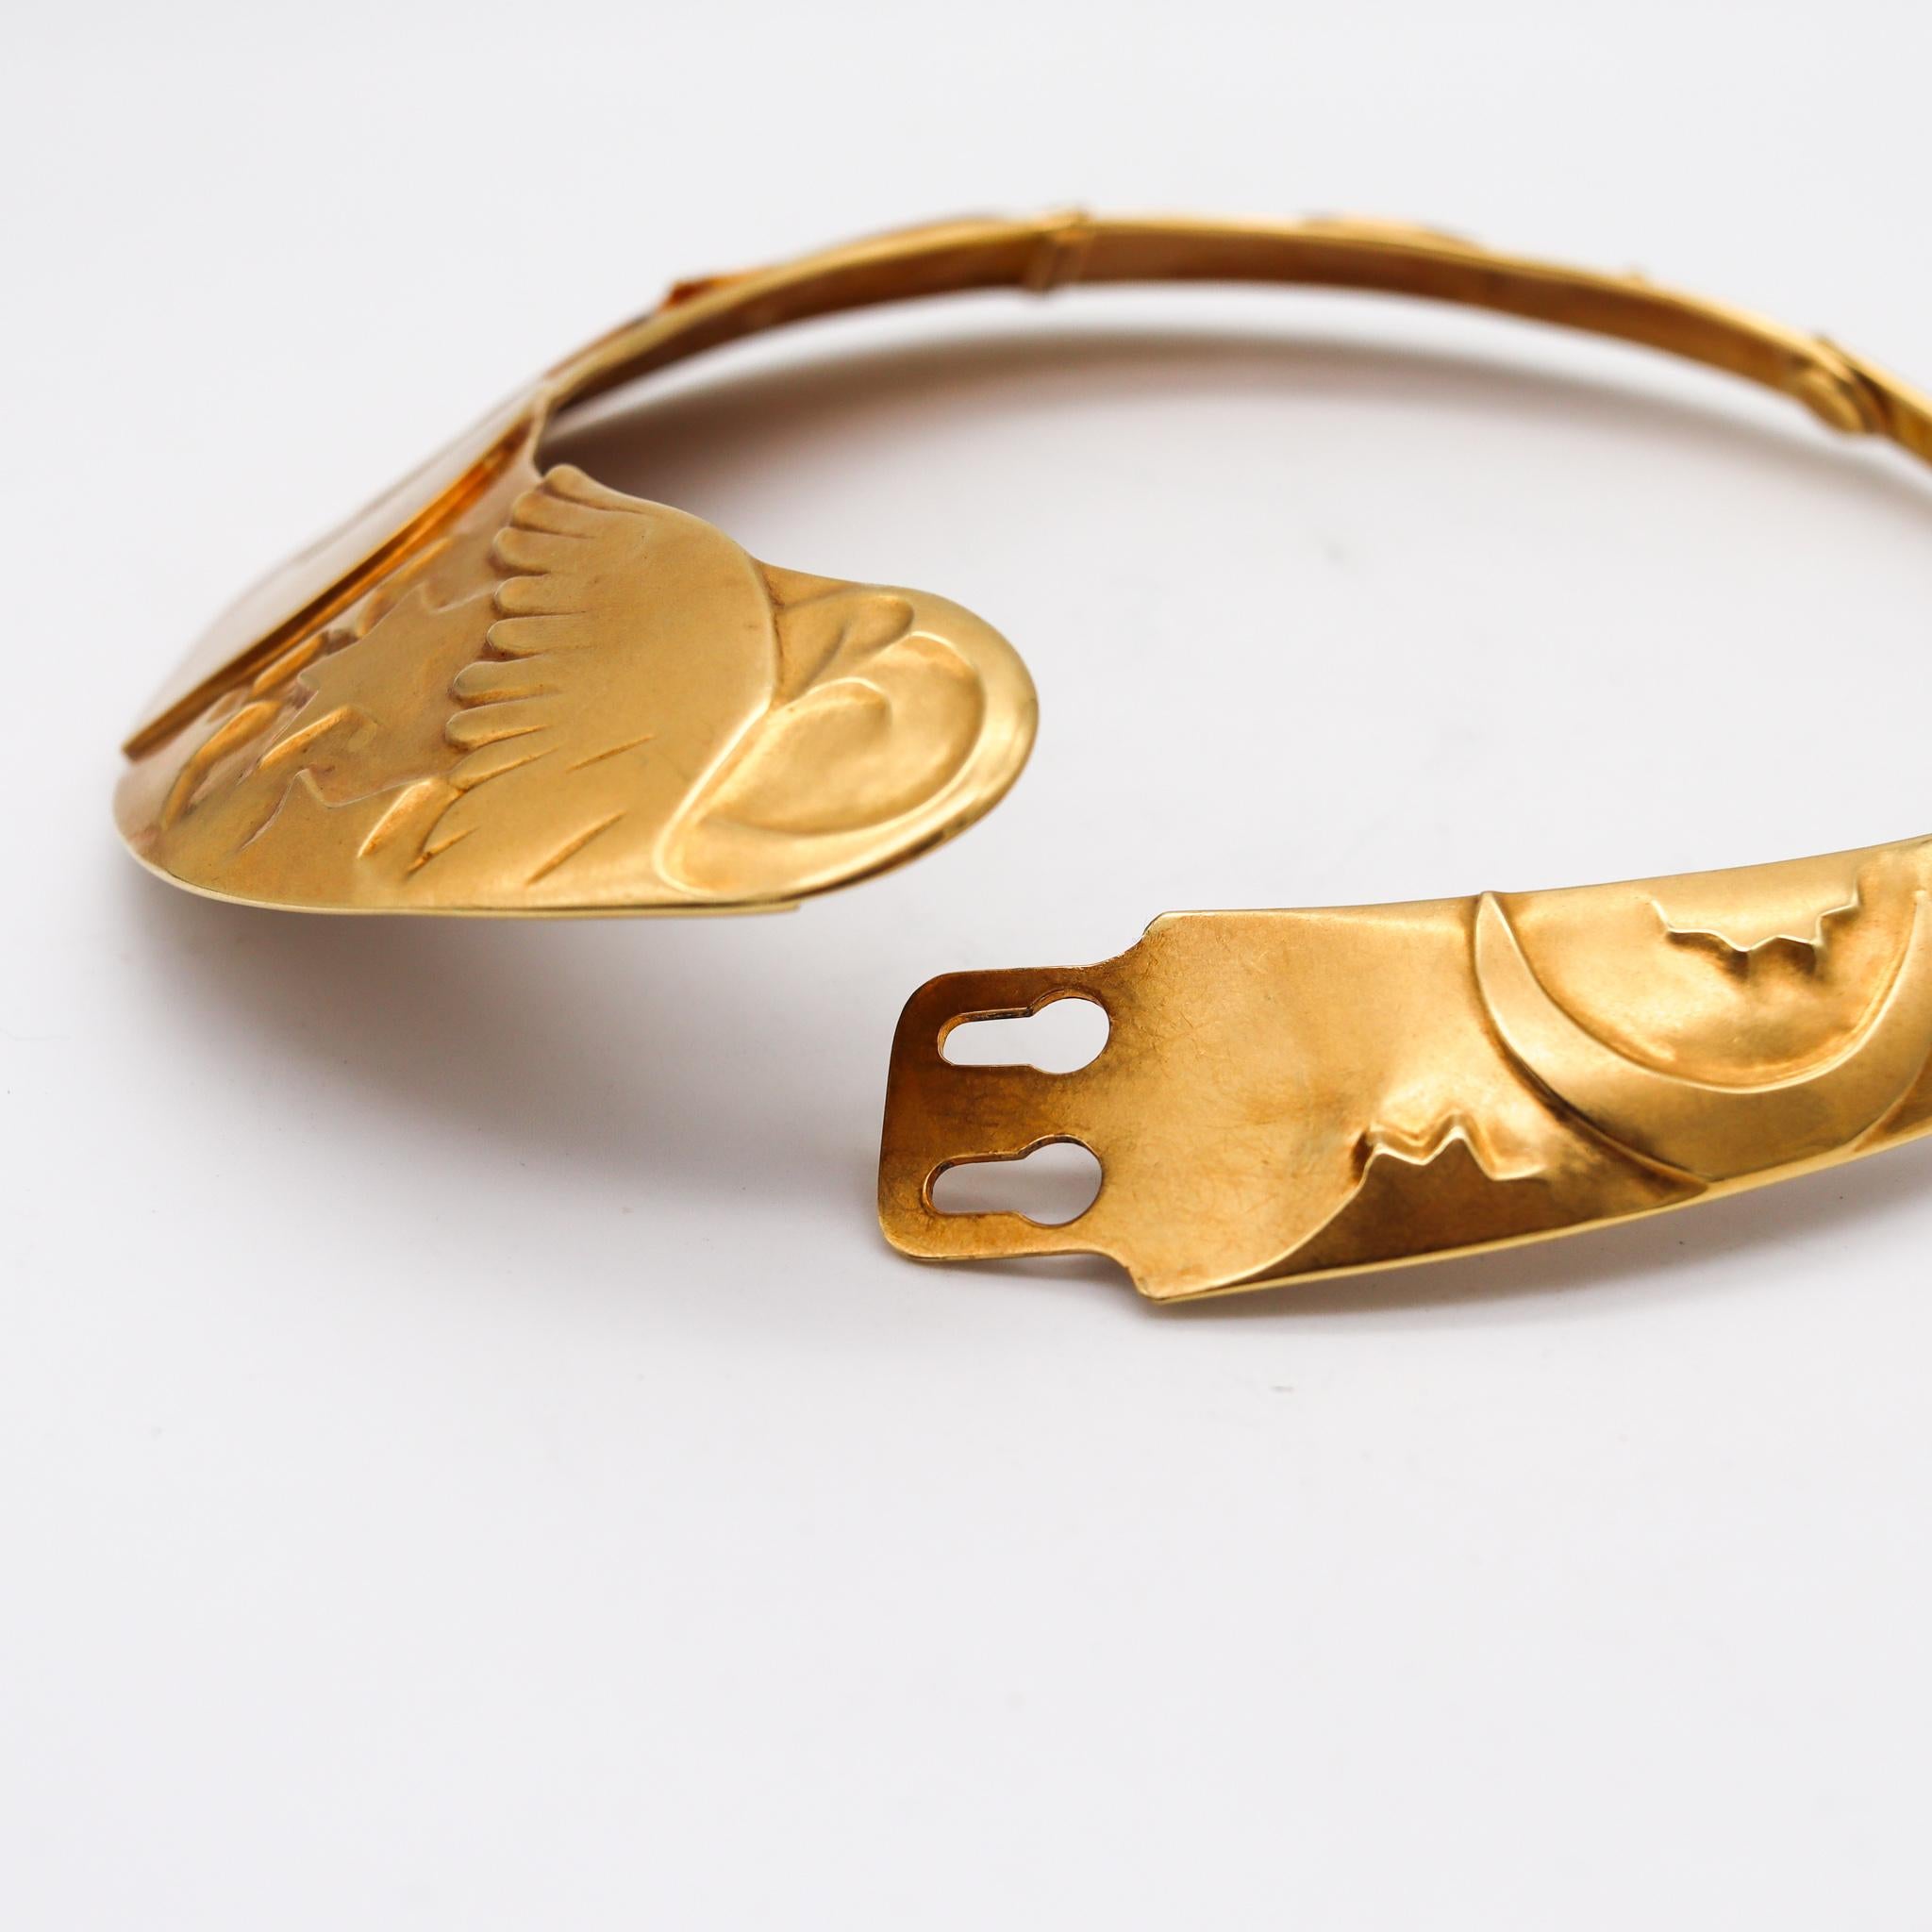 Tiffany & Co. 1981 Angela Cummings Prototype Nocturnal Collar Necklace 18Kt Gold In Excellent Condition For Sale In Miami, FL